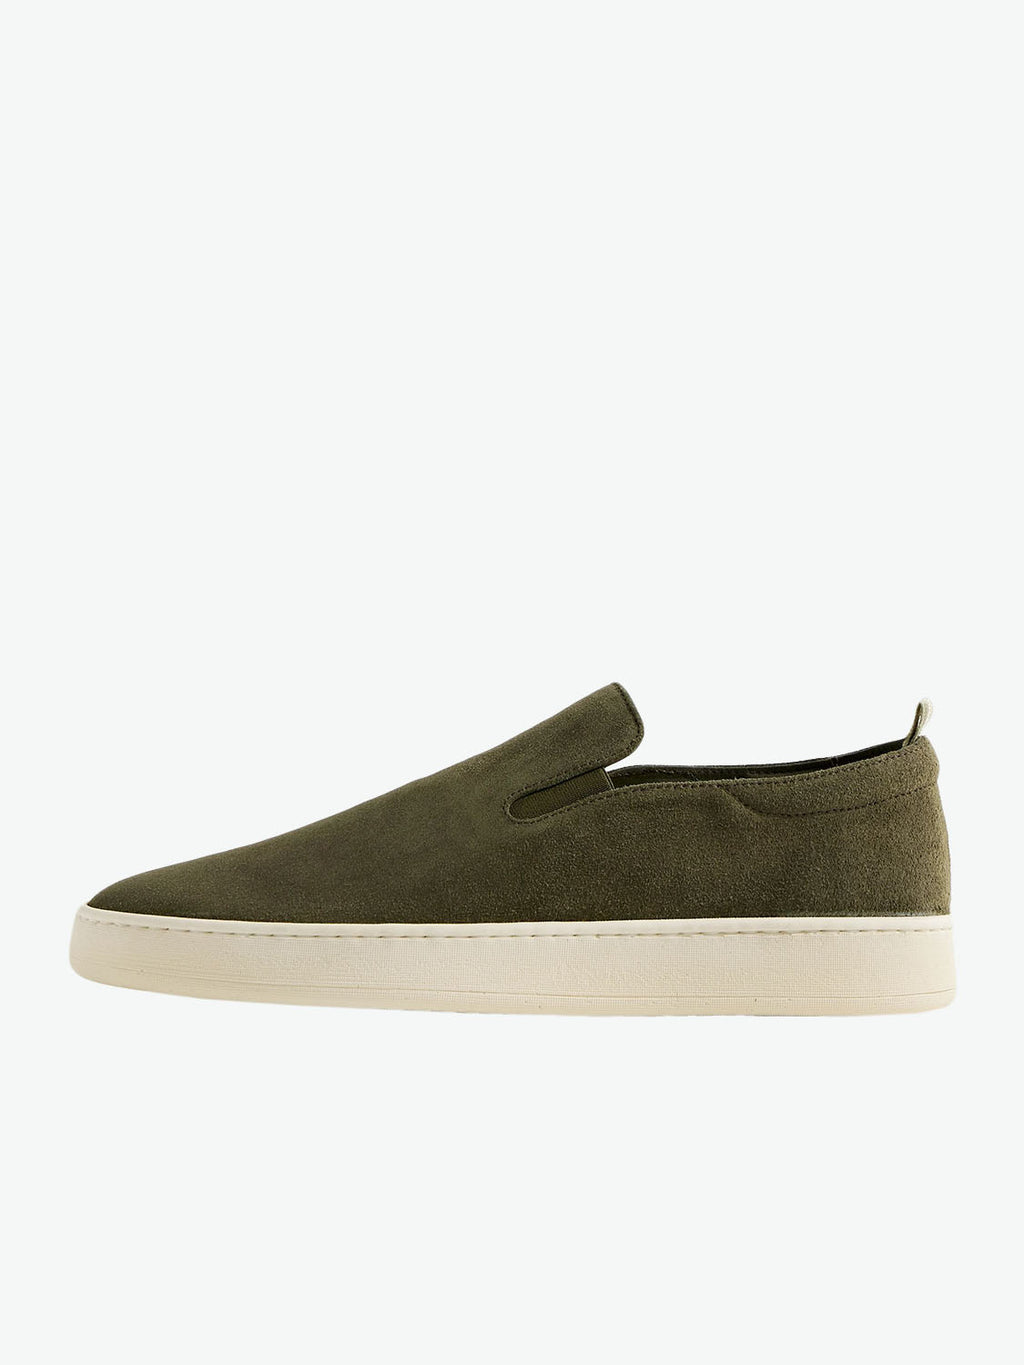 Officine Creative Once Suede Slip-on Sneakers Military